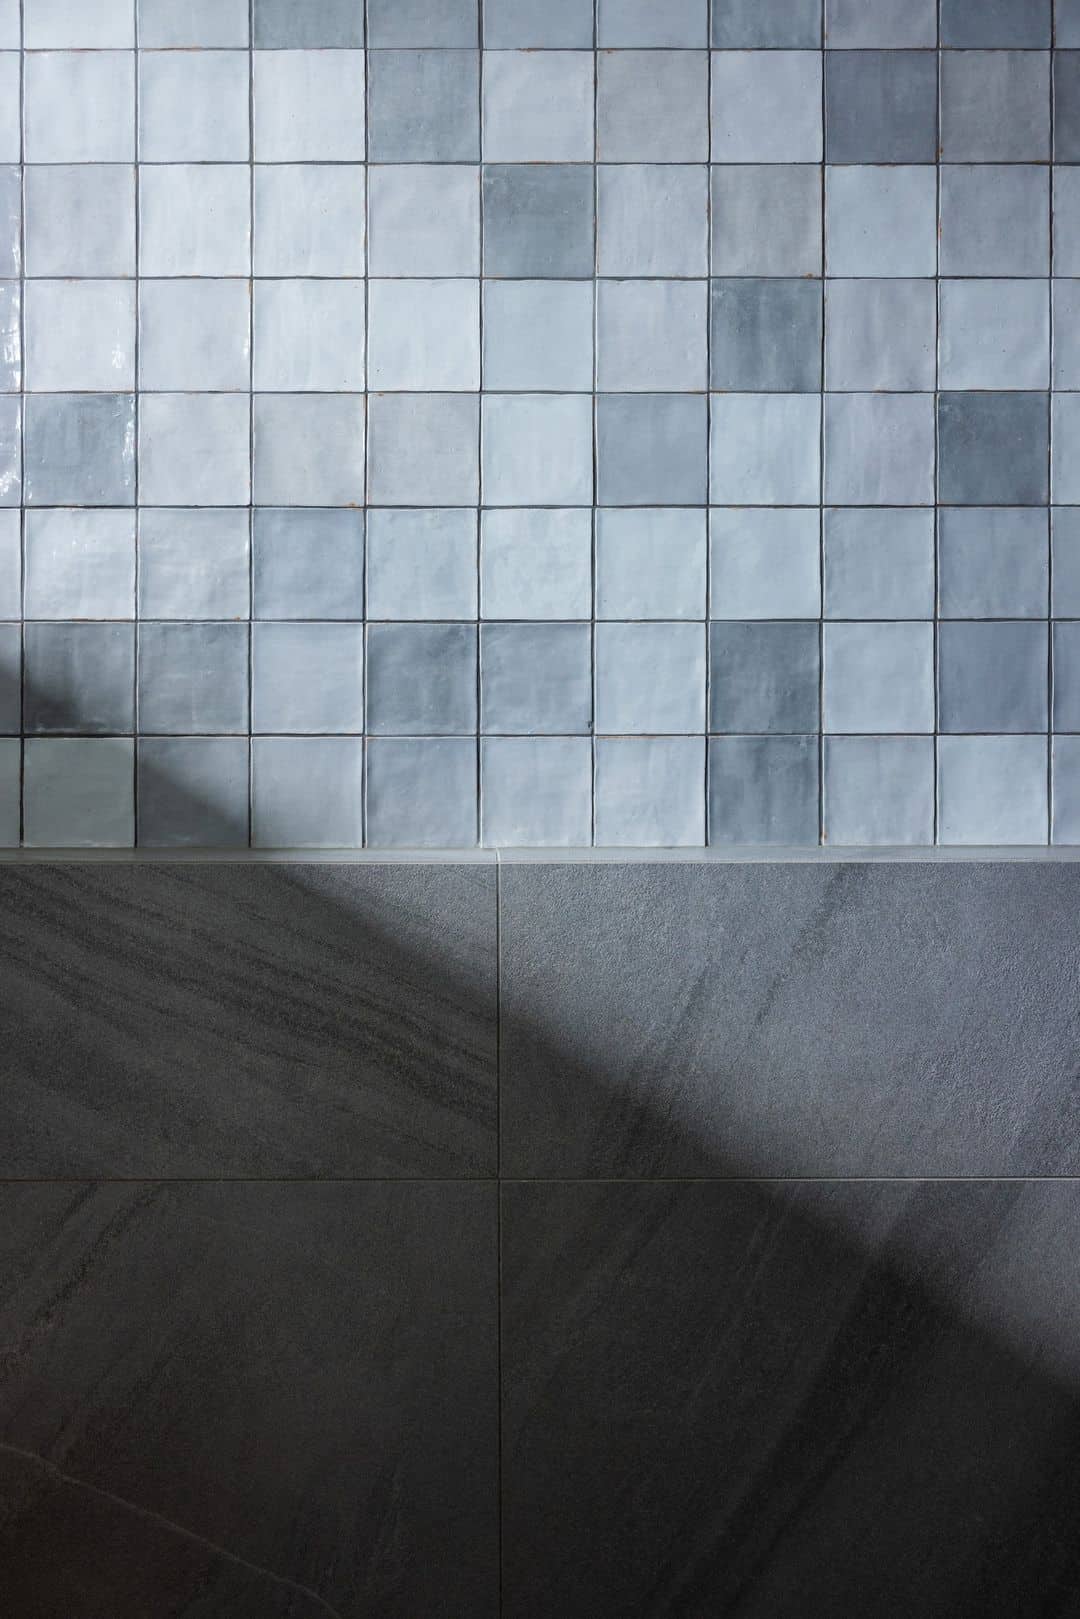 Technical Differences Between Floor and Wall Tiles